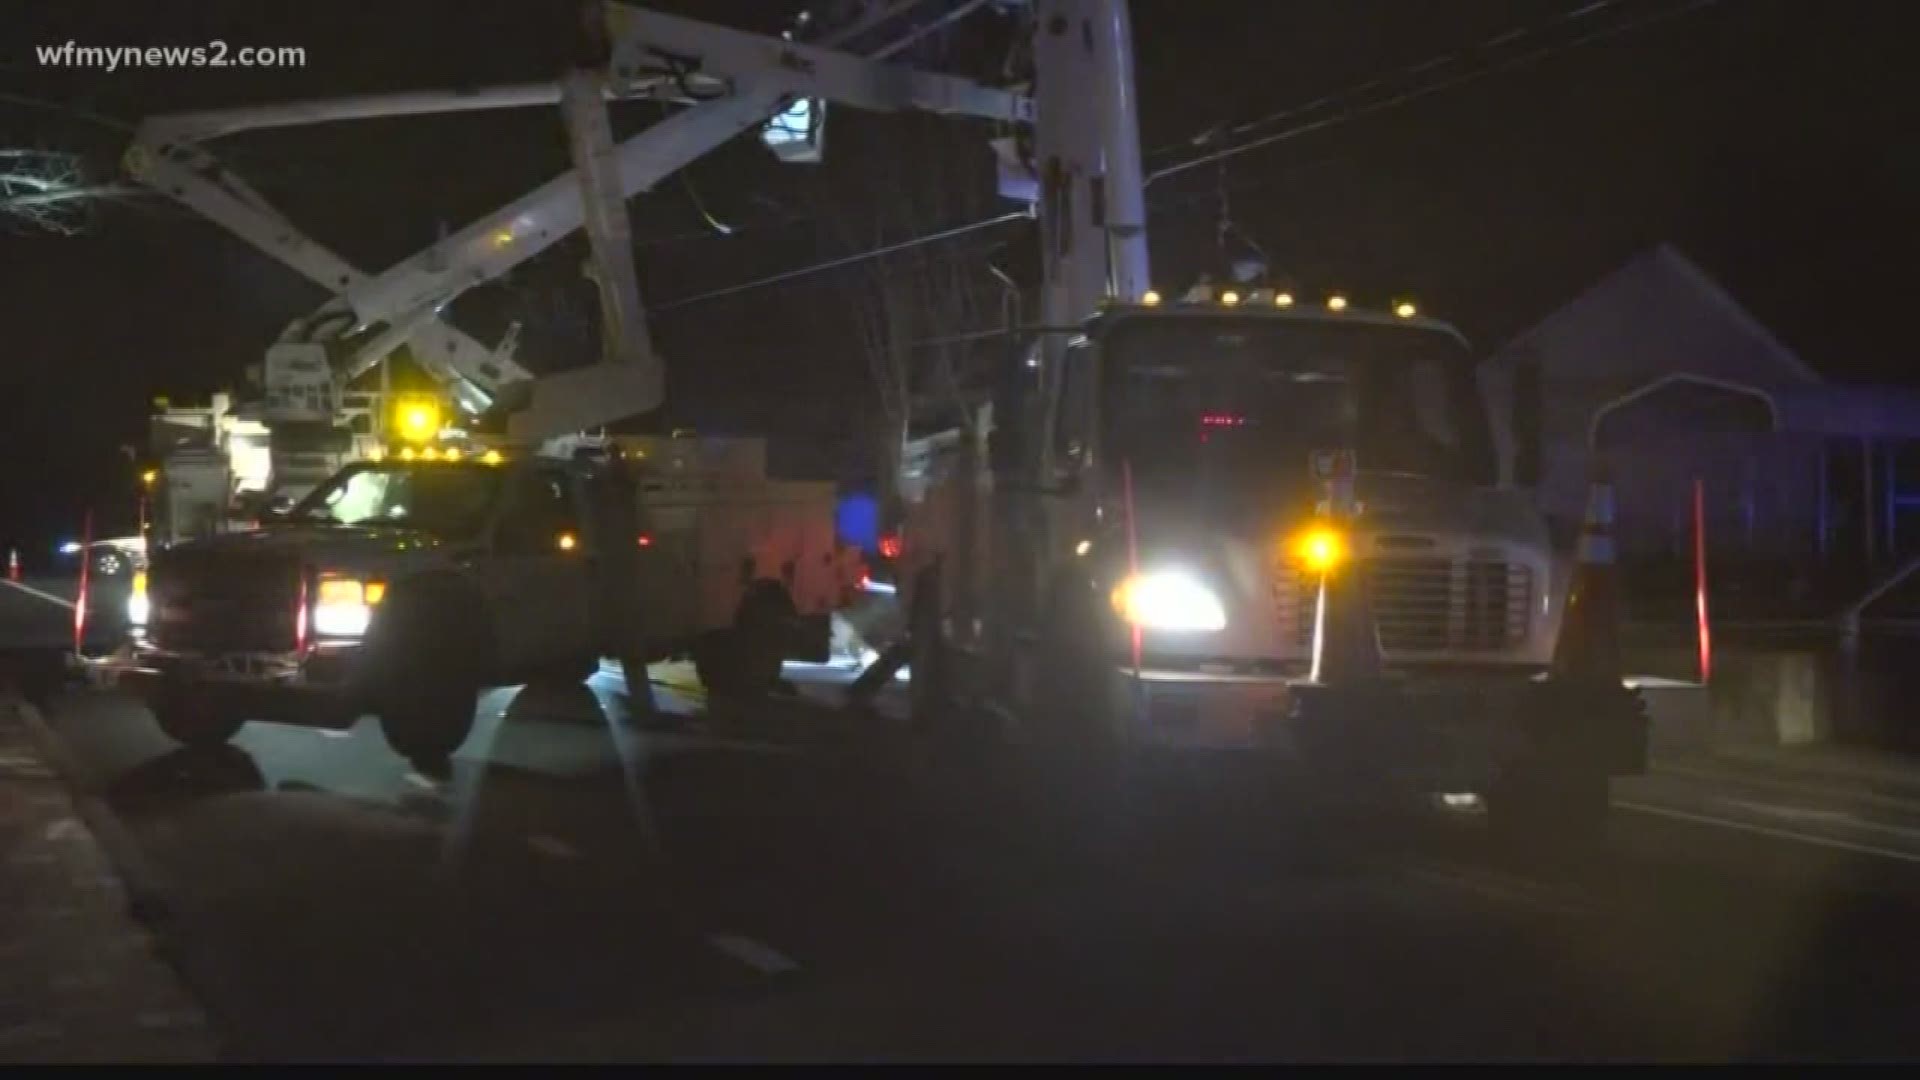 Nearly 1,500 Duke Energy customers were without power in Guilford County.